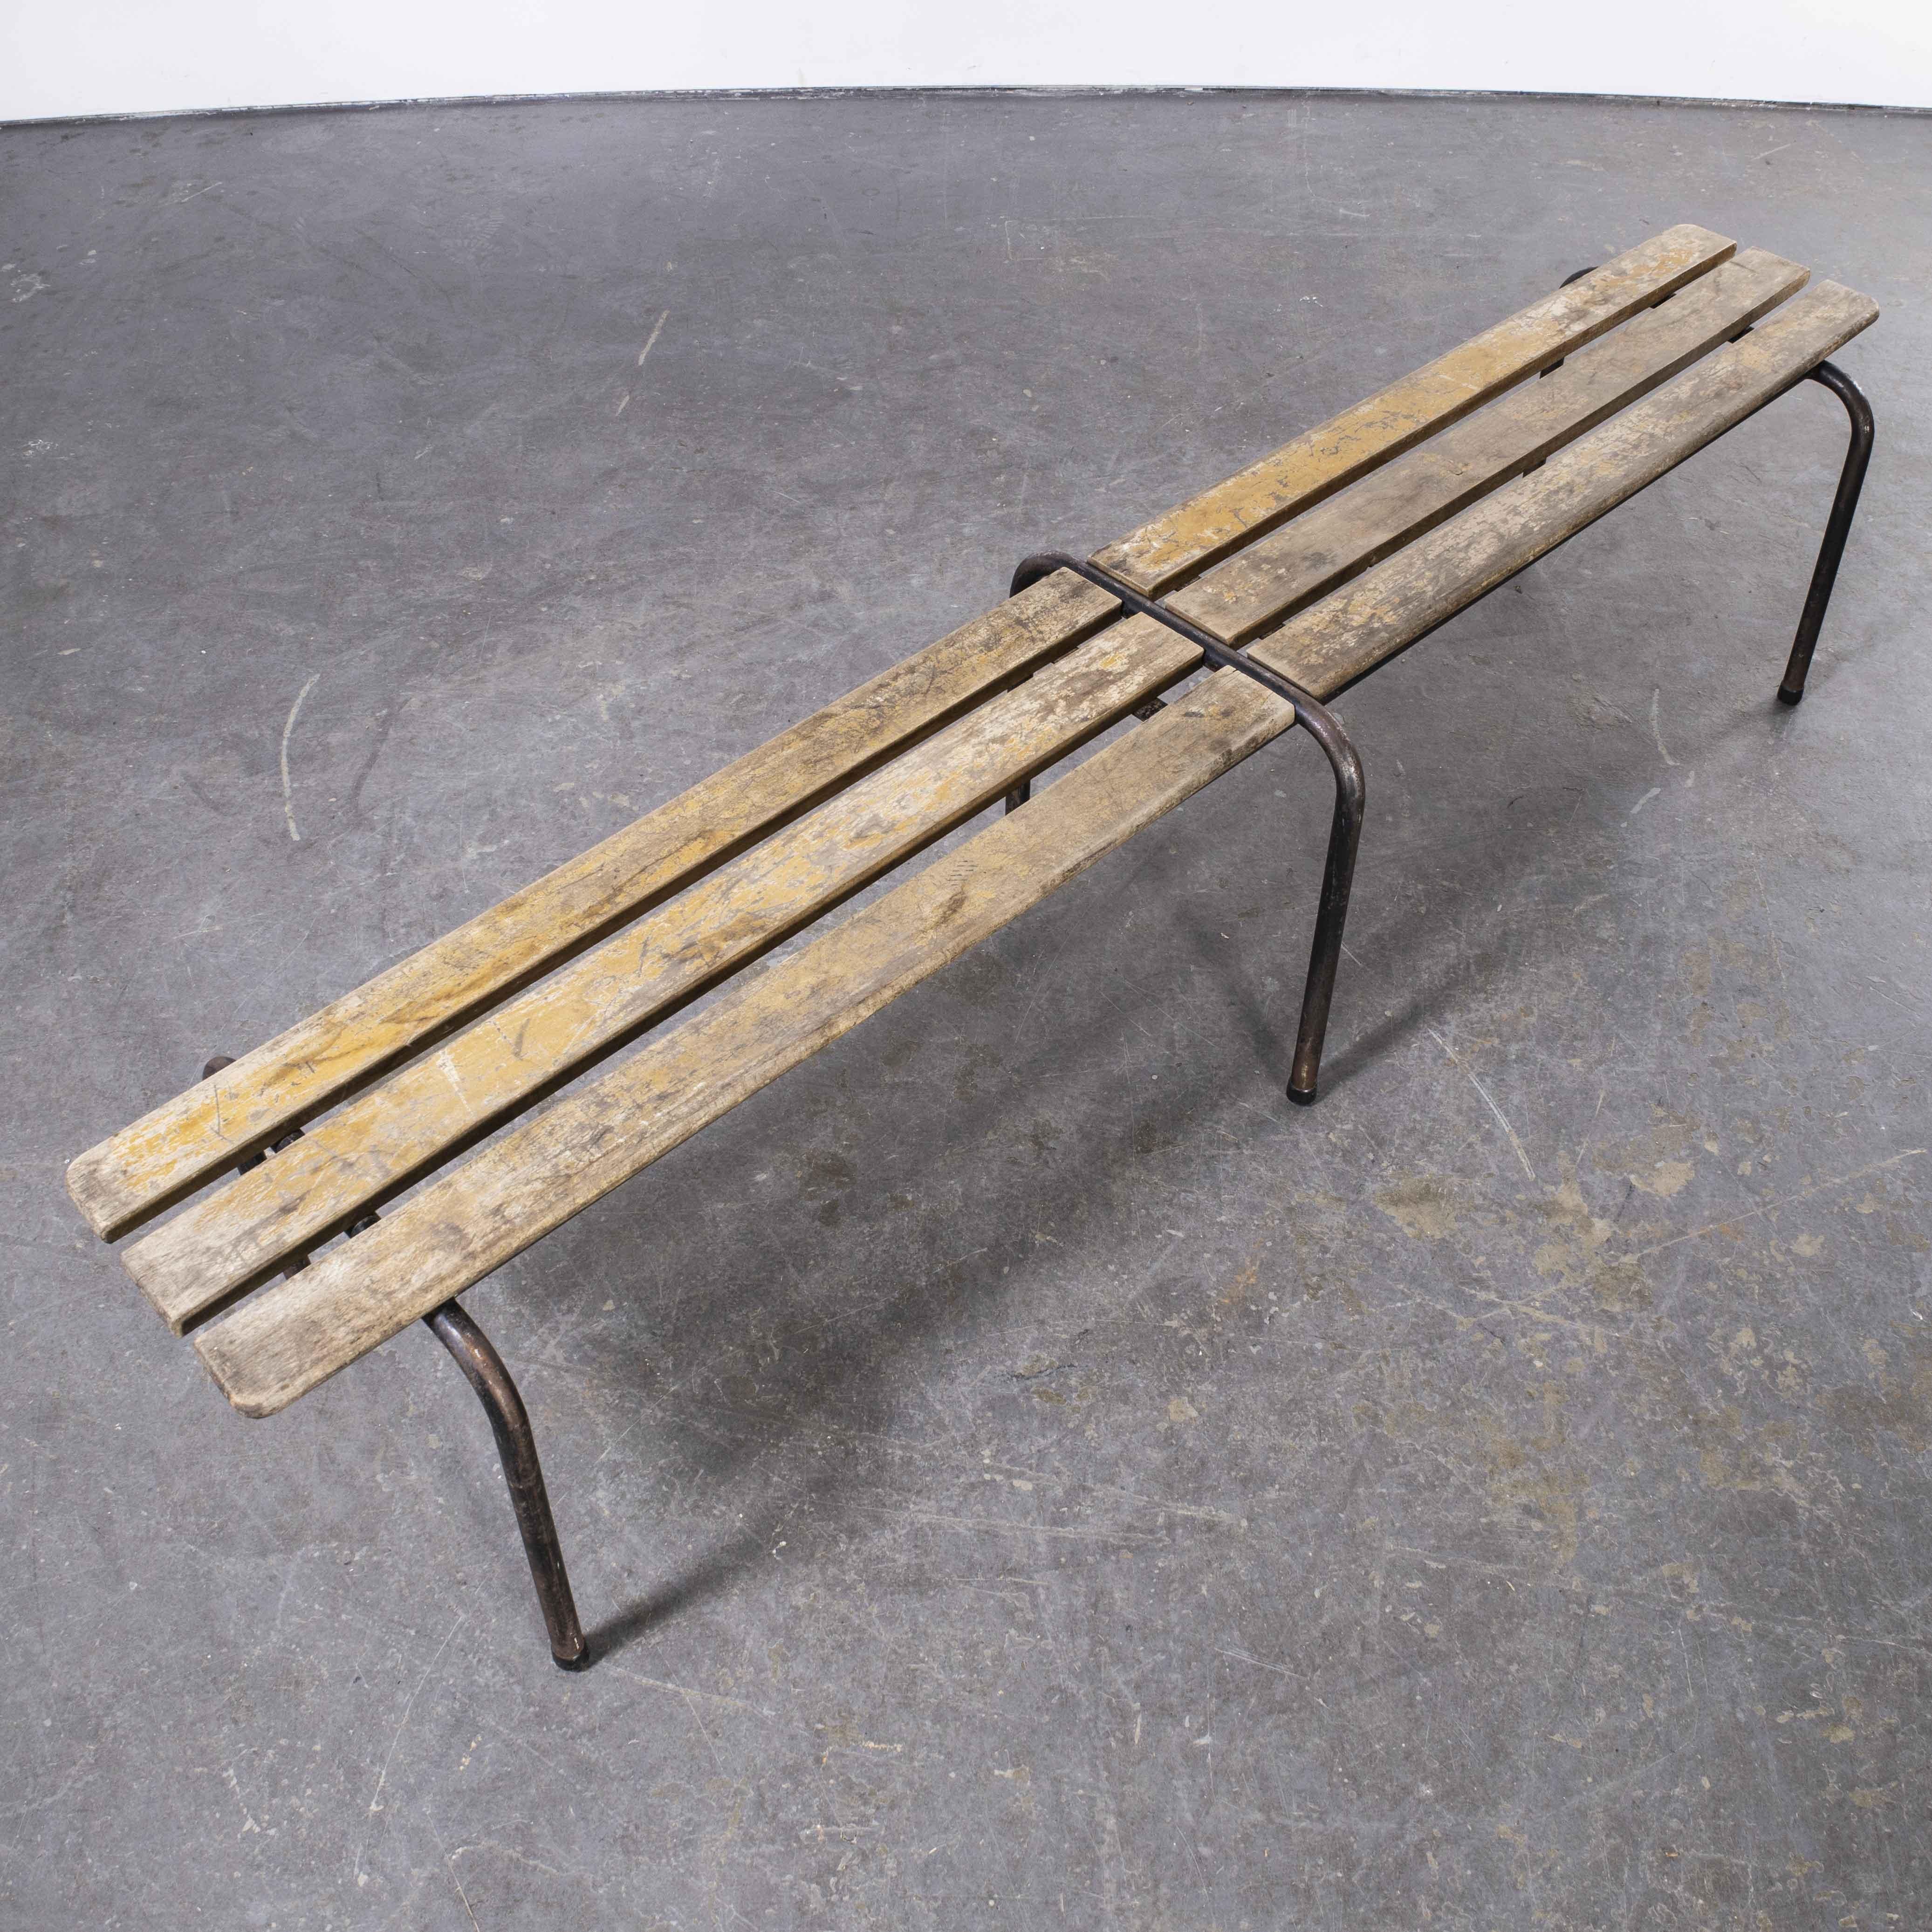 1940’s Original French Mullca Long Slatted bench (Model 682)

1940’s Original French Mullca Long Slatted bench (Model 682). One of our most favourite makers, in 1947 Robert Muller and Gaston Cavaillon created the company Mullca that went on to